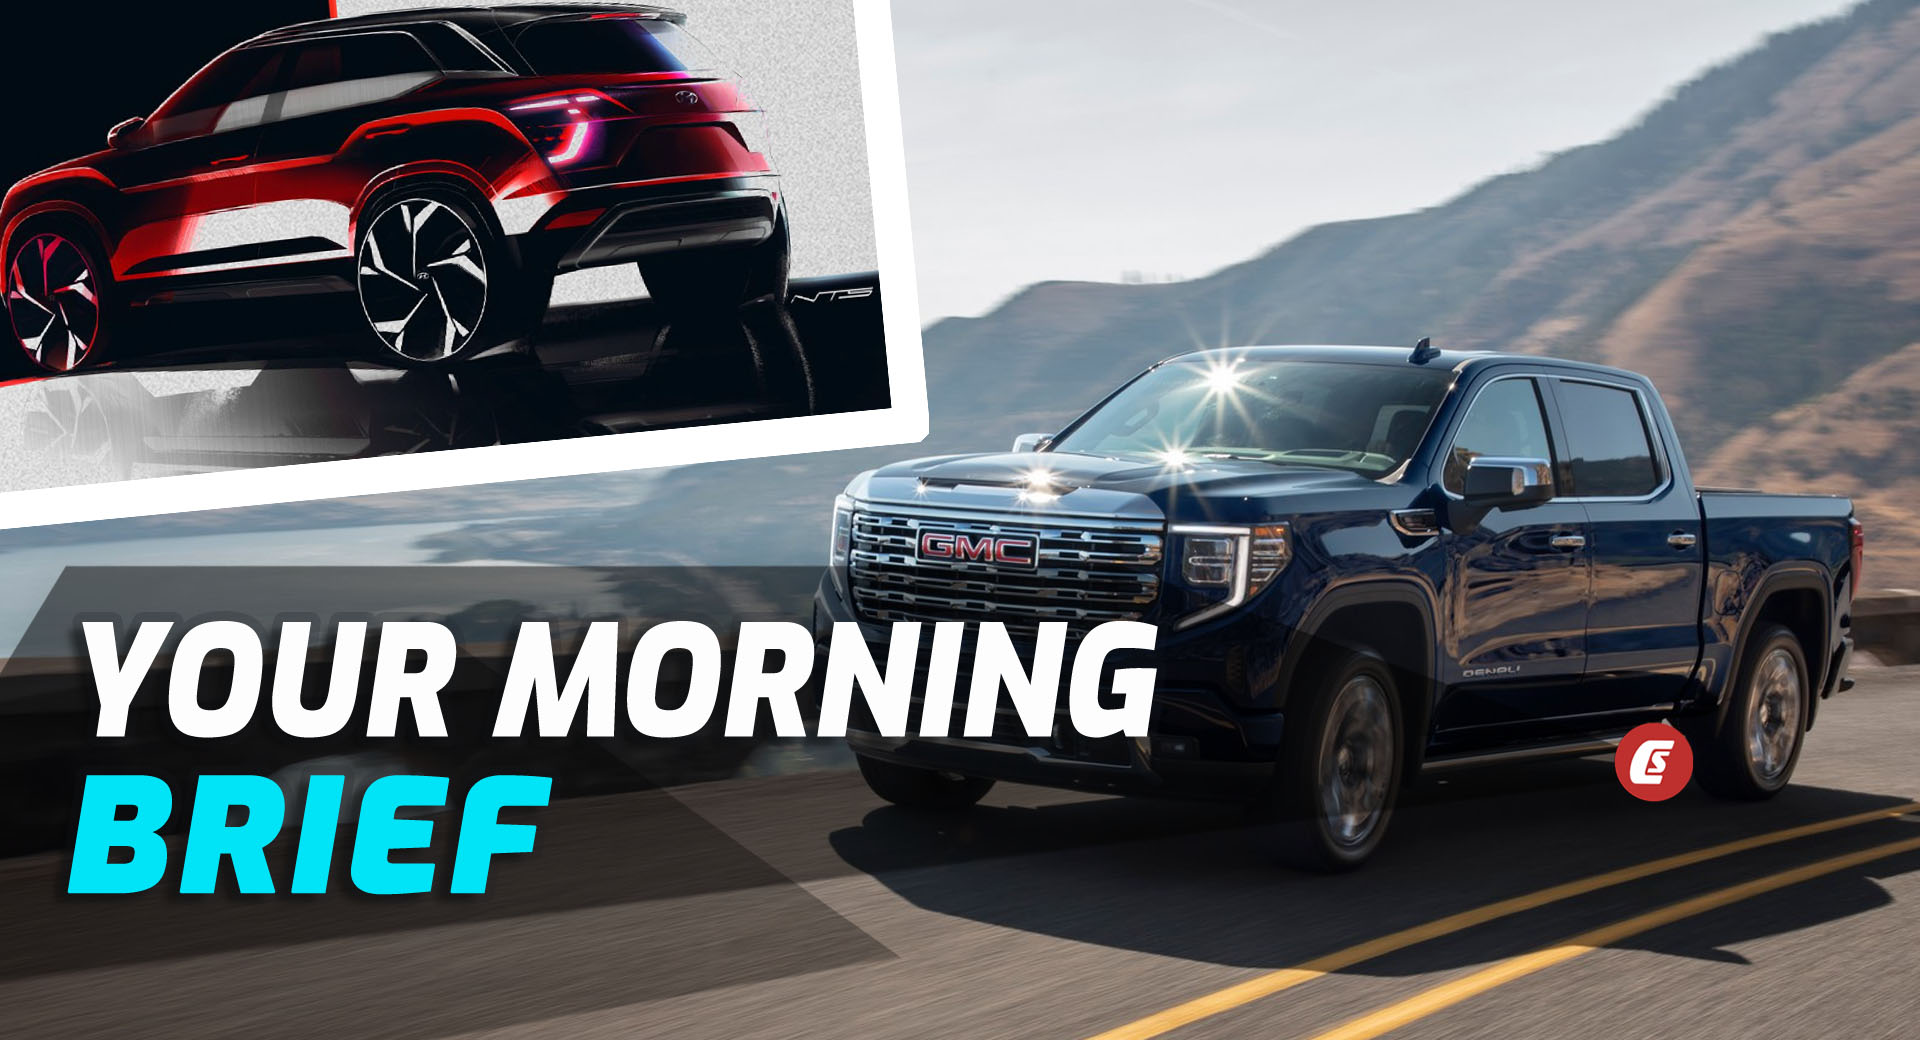 2022 GMC Sierra 1500, French Police Gets Alpine A110s, And Hyundai Creta Facelift: Your Morning Brief